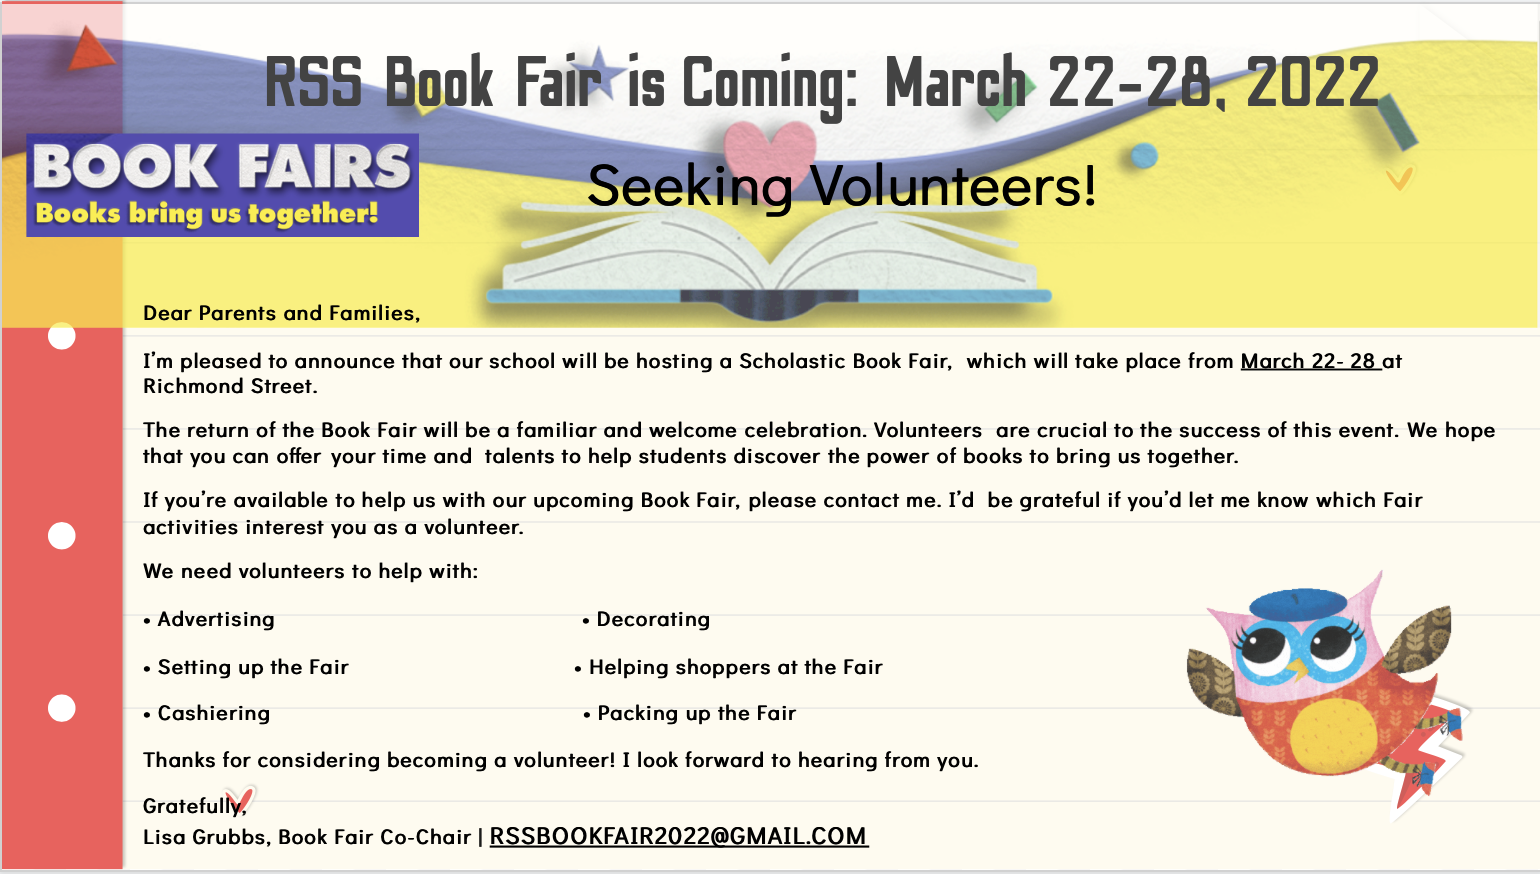 RSS Book Fair is Coming: March 22-28, 2022